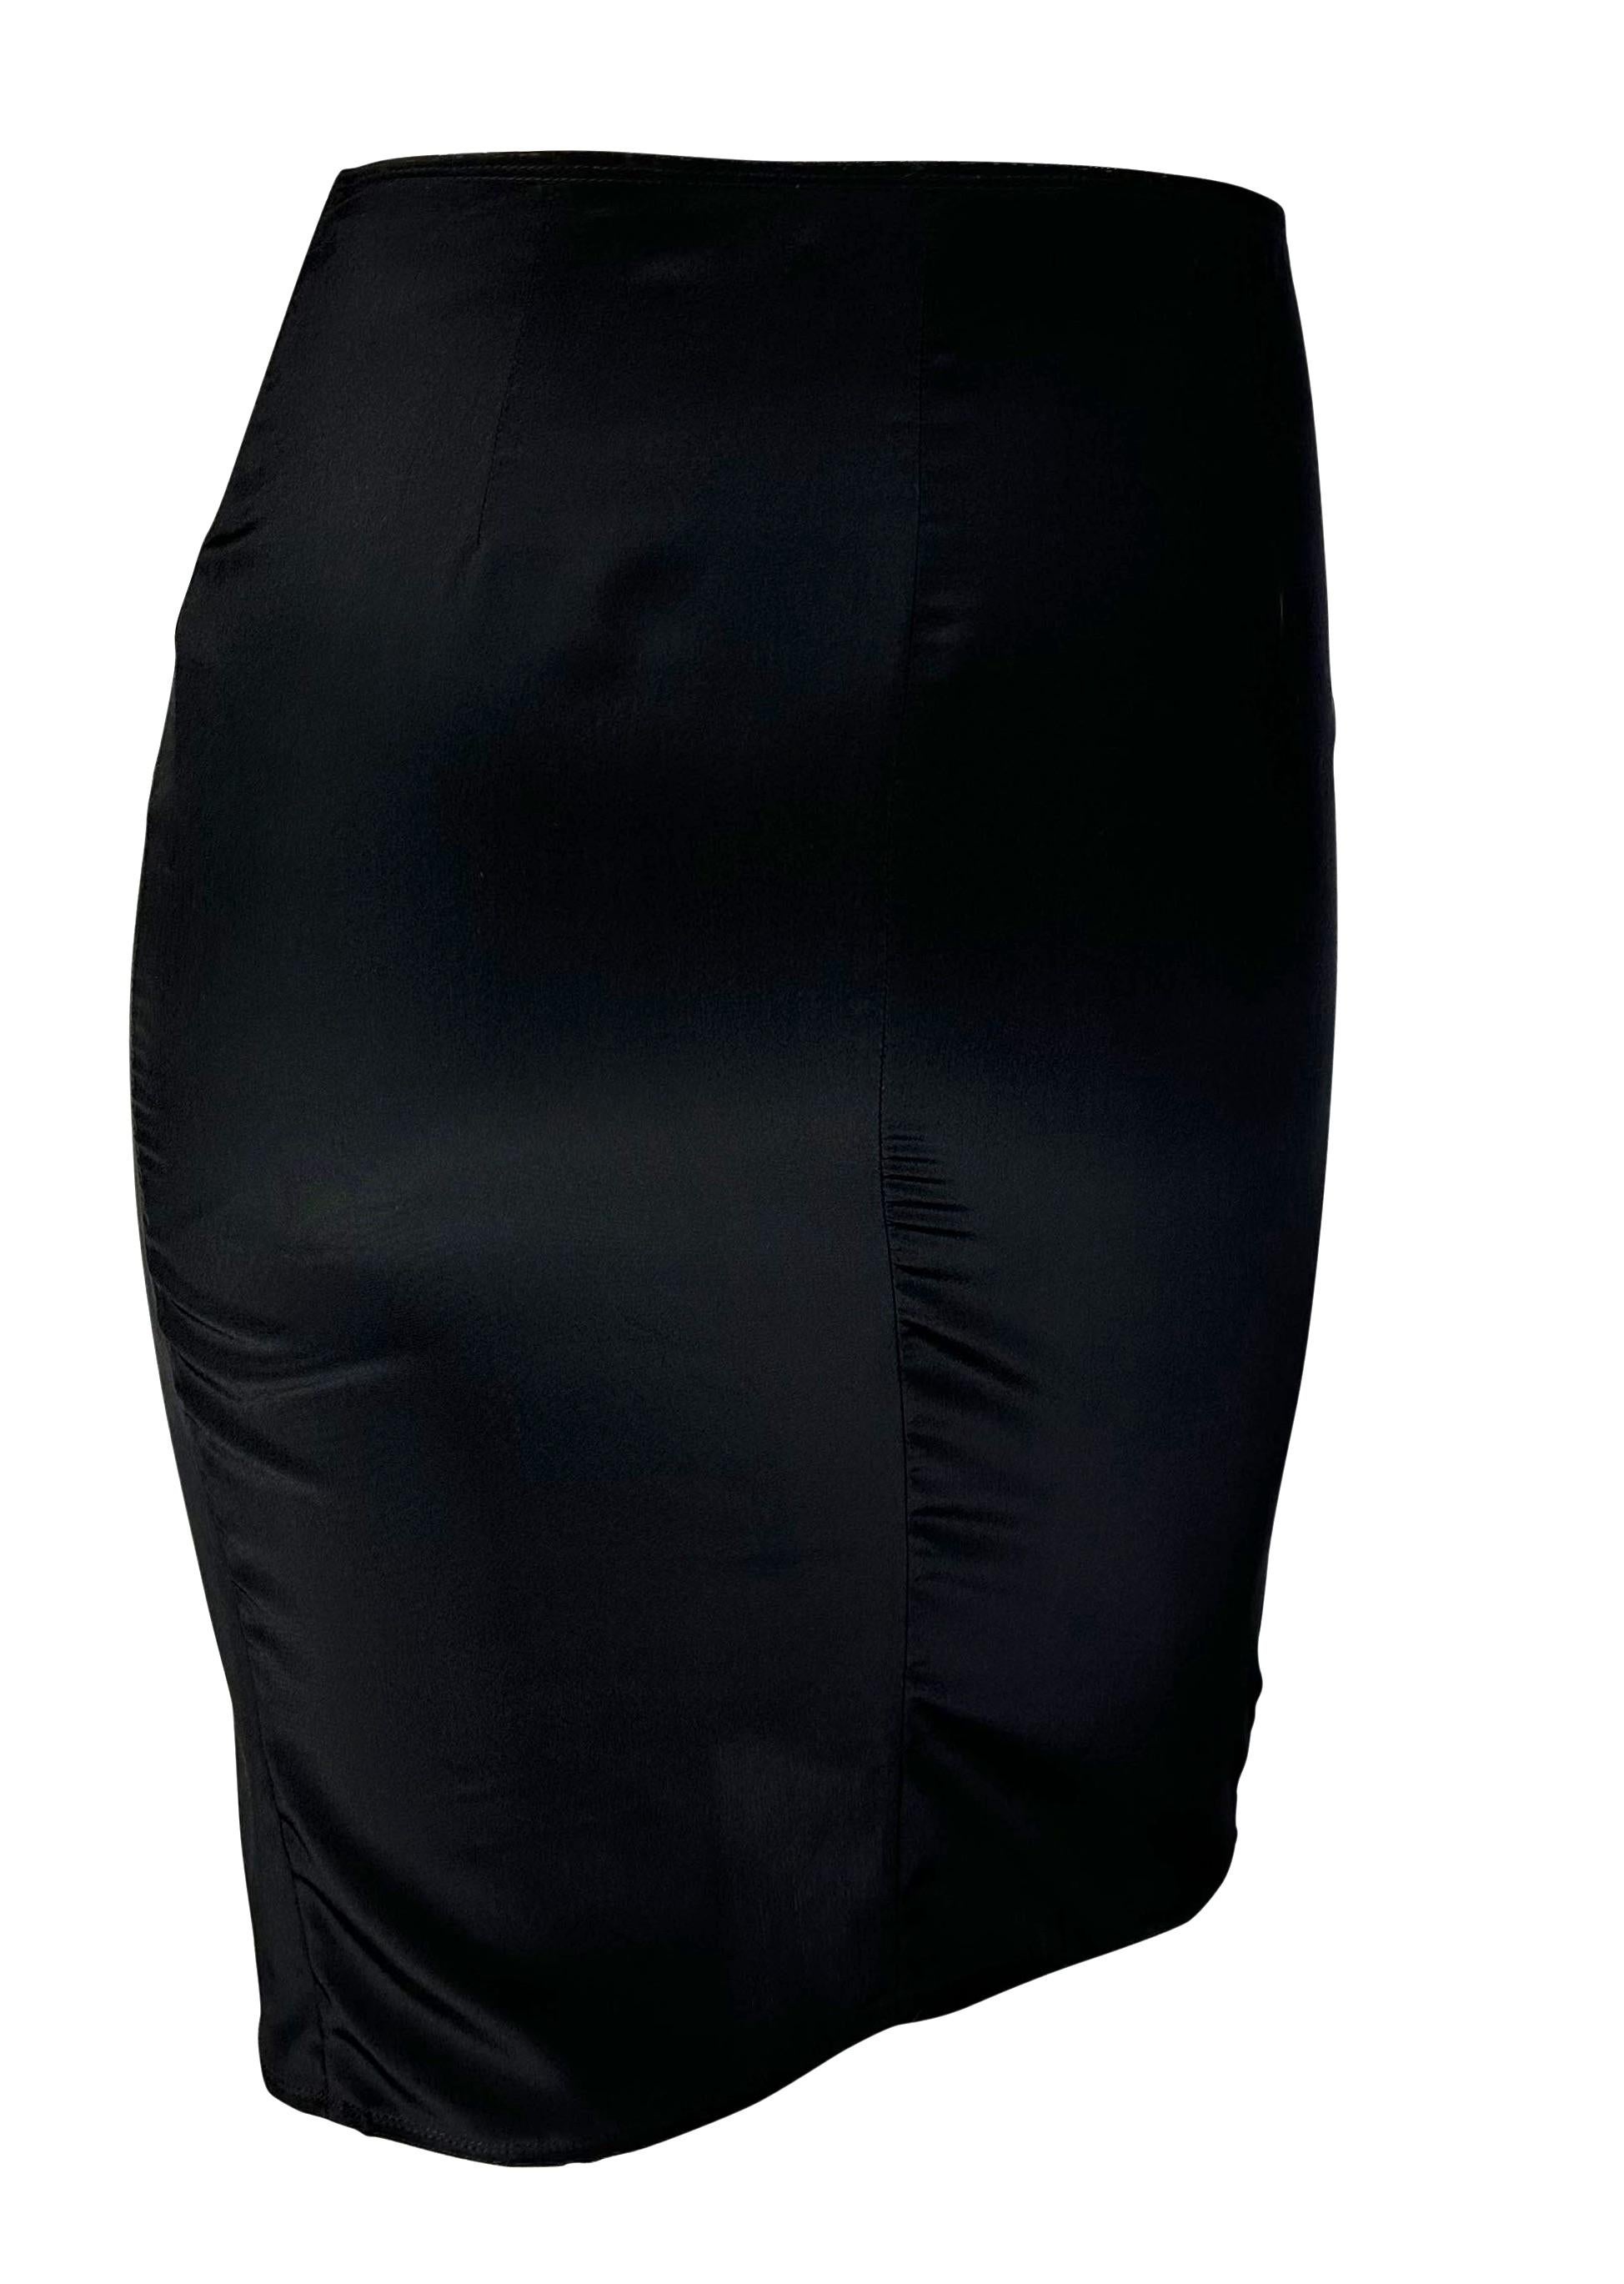 Women's Early 2000s Yves Saint Laurent by Tom Ford Black Silk Ruffle Button Skirt  For Sale